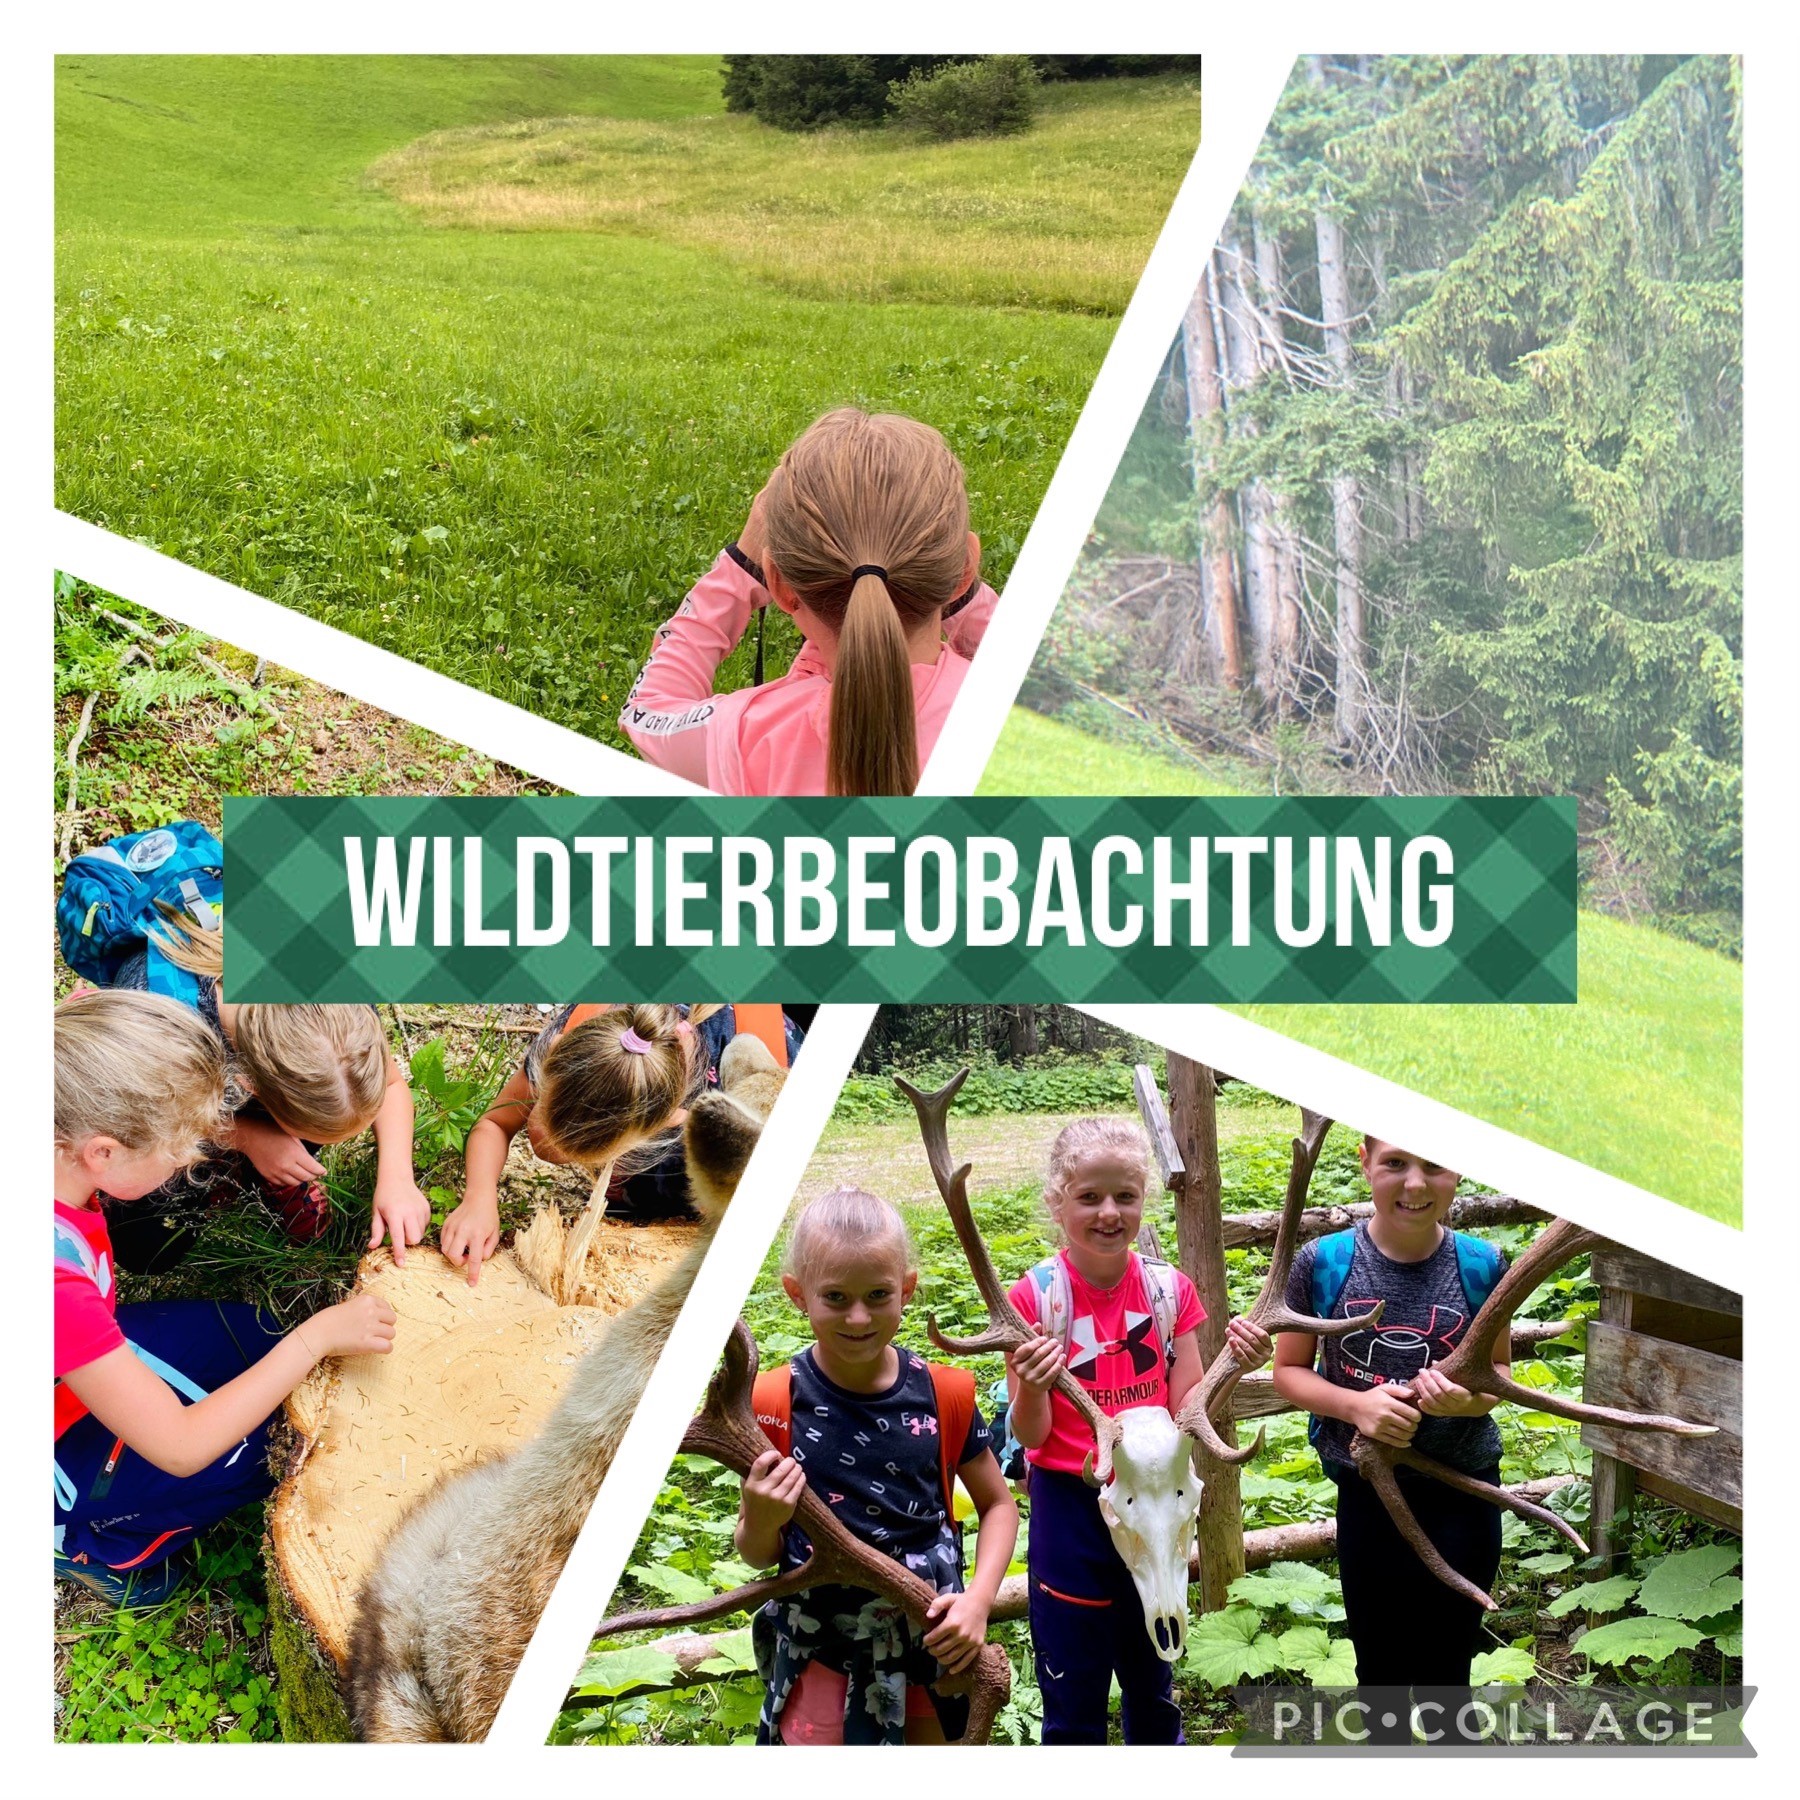 Wildtierbeobachtung